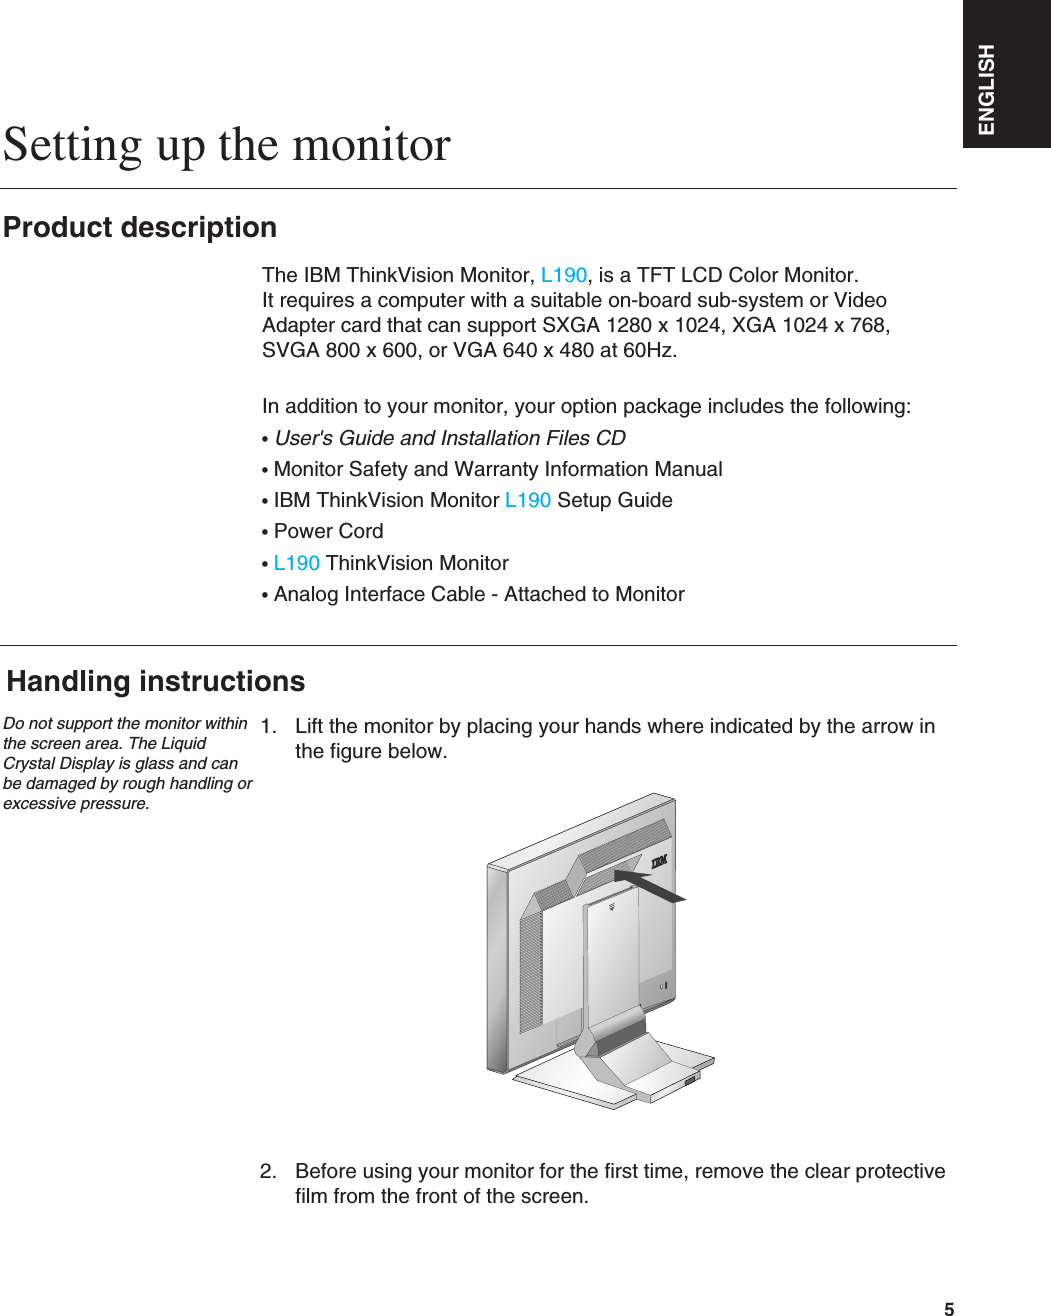 ENGLISH5Setting up the monitorHandling instructions1. Lift the monitor by placing your hands where indicated by the arrow inthe figure below. 2. Before using your monitor for the first time, remove the clear protectivefilm from the front of the screen. Product descriptionThe IBM ThinkVision Monitor, L190, is a TFT LCD Color Monitor. It requires a computer with a suitable on-board sub-system or VideoAdapter card that can support SXGA 1280 x 1024, XGA 1024 x 768, SVGA 800 x 600, or VGA 640 x 480 at 60Hz.In addition to your monitor, your option package includes the following:•User&apos;s Guide and Installation Files CD•Monitor Safety and Warranty Information Manual•IBM ThinkVision Monitor L190 Setup Guide•Power Cord•L190 ThinkVision Monitor•Analog Interface Cable - Attached to MonitorDo not support the monitor withinthe screen area. The LiquidCrystal Display is glass and canbe damaged by rough handling orexcessive pressure.